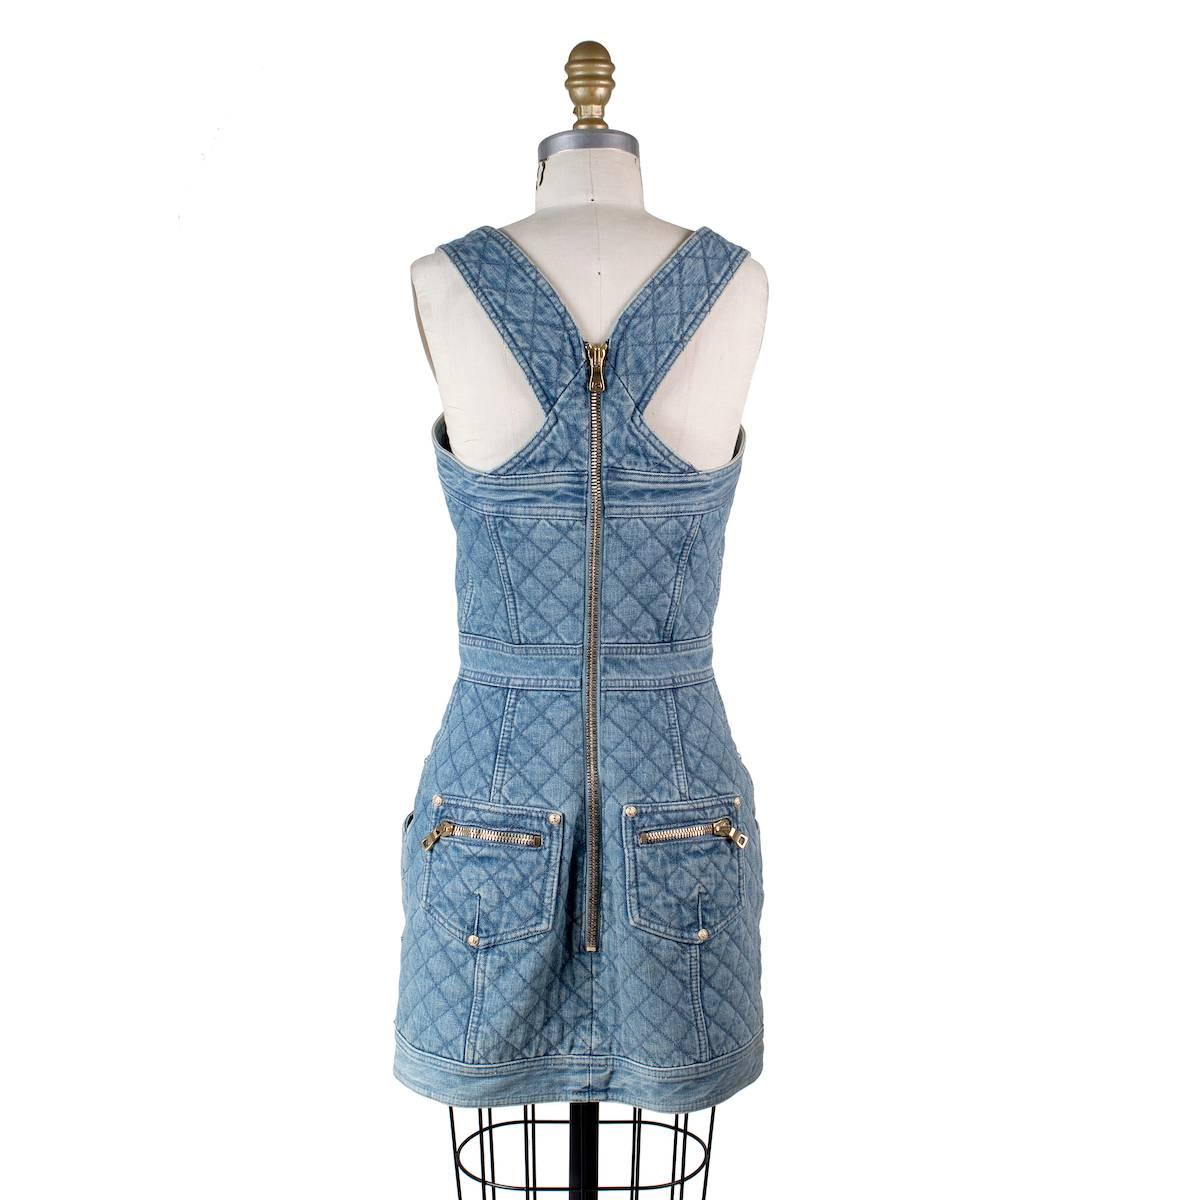 This is a dress by Balmain. Quilted light blue wash denim in overalls style.  Features gold buttons and hip pockets. Back zipper closure.